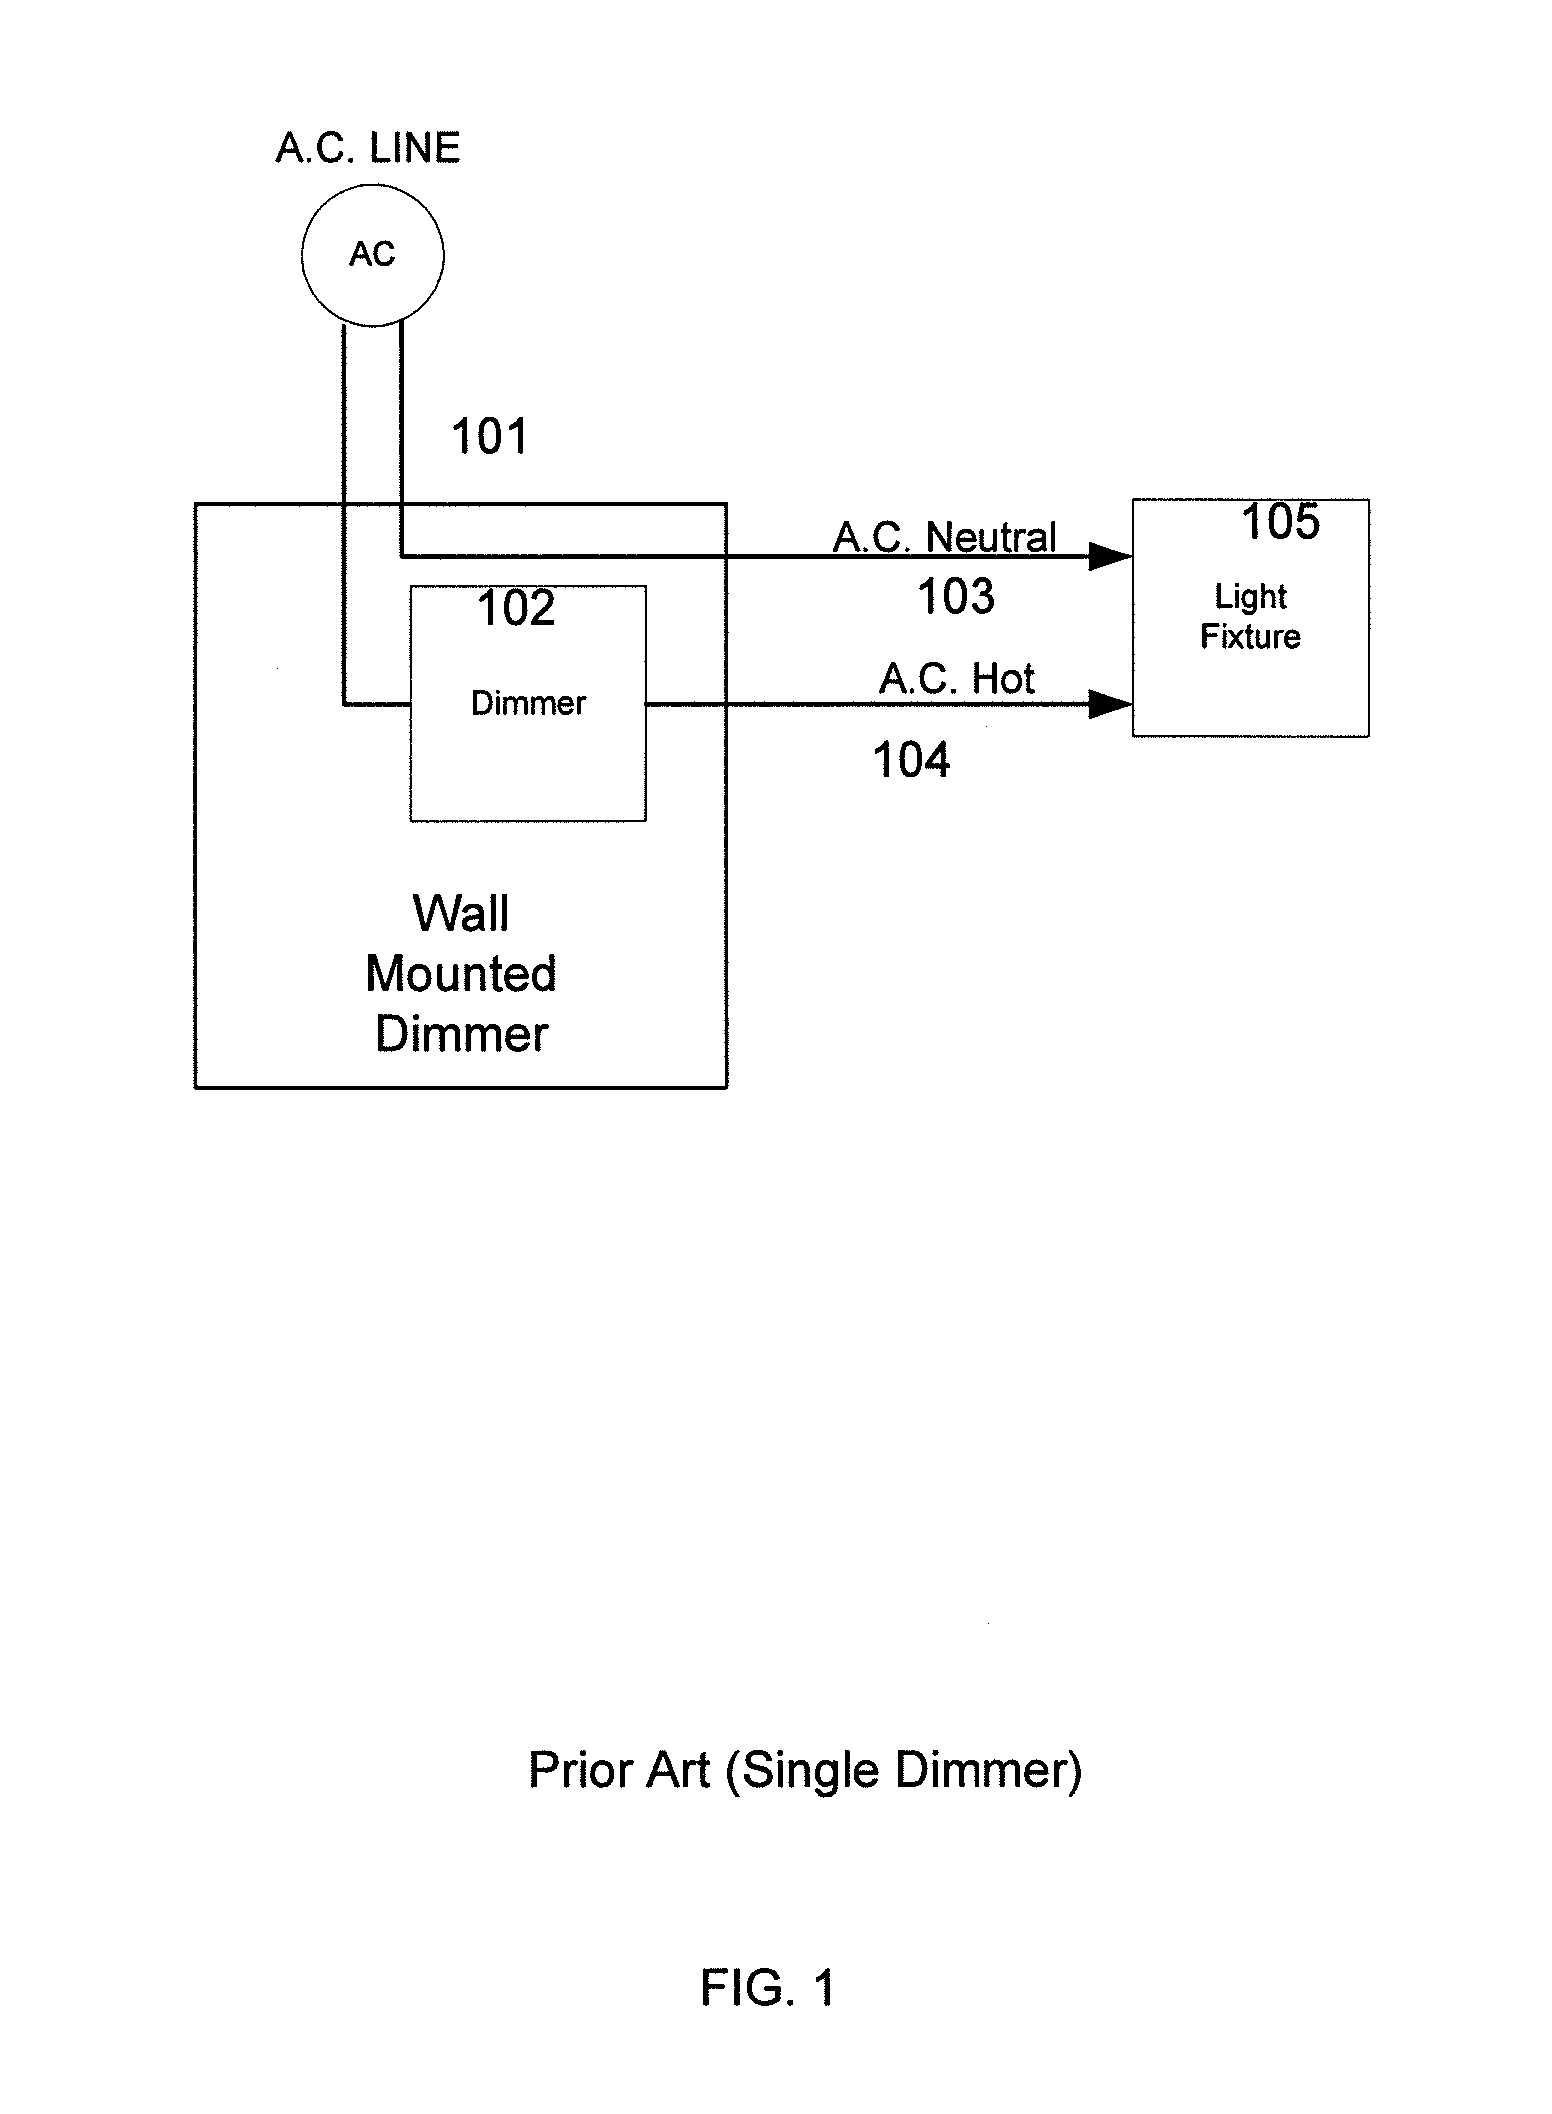 Combined lighting device with an integrated dimming control system